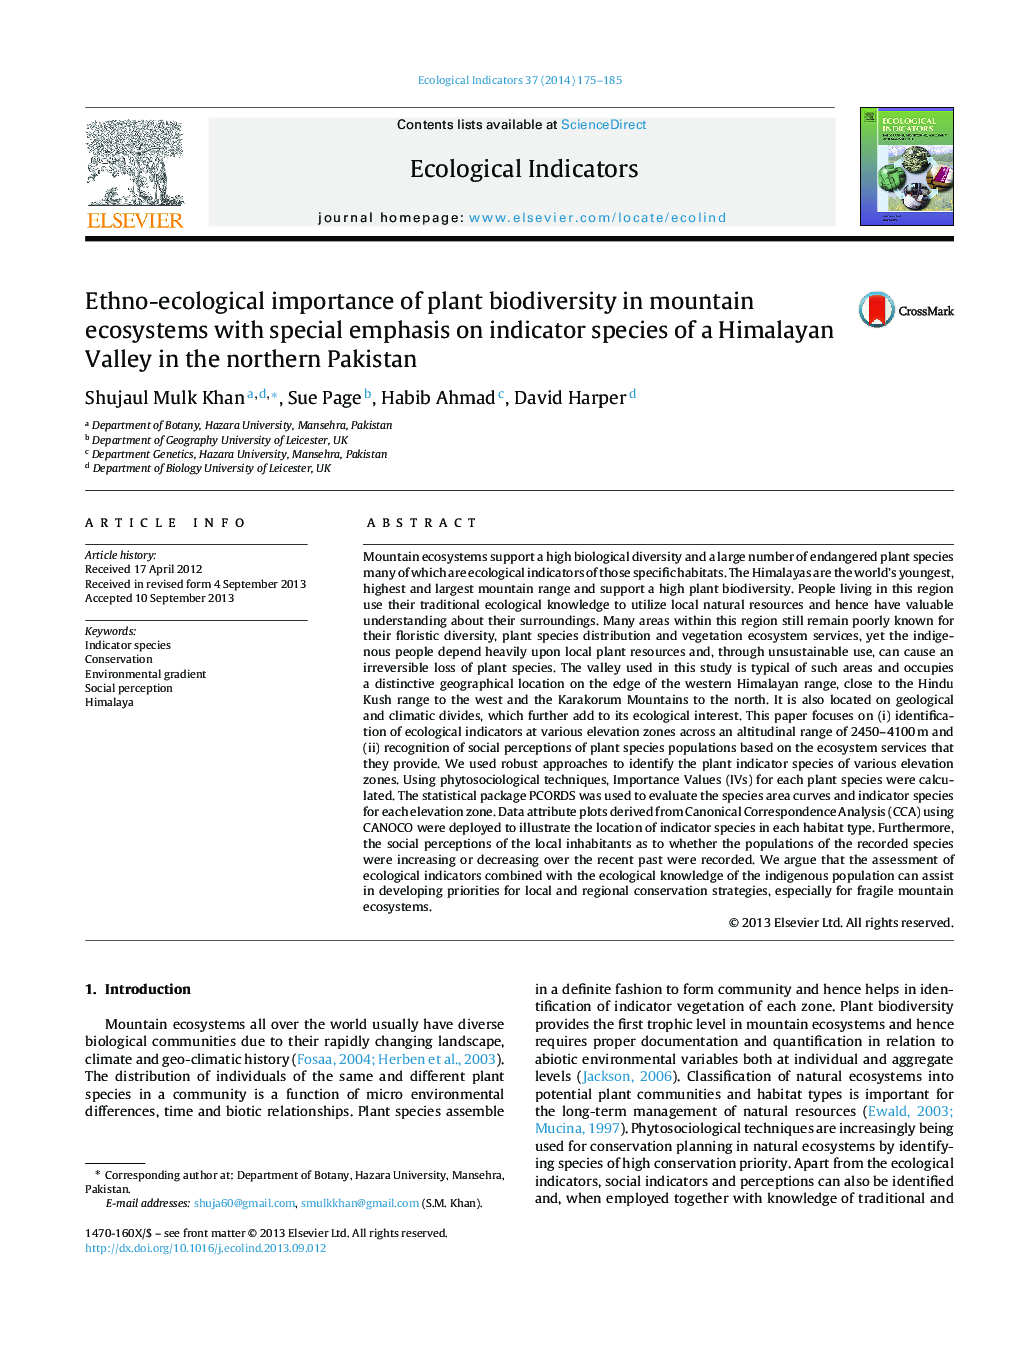 Ethno-ecological importance of plant biodiversity in mountain ecosystems with special emphasis on indicator species of a Himalayan Valley in the northern Pakistan